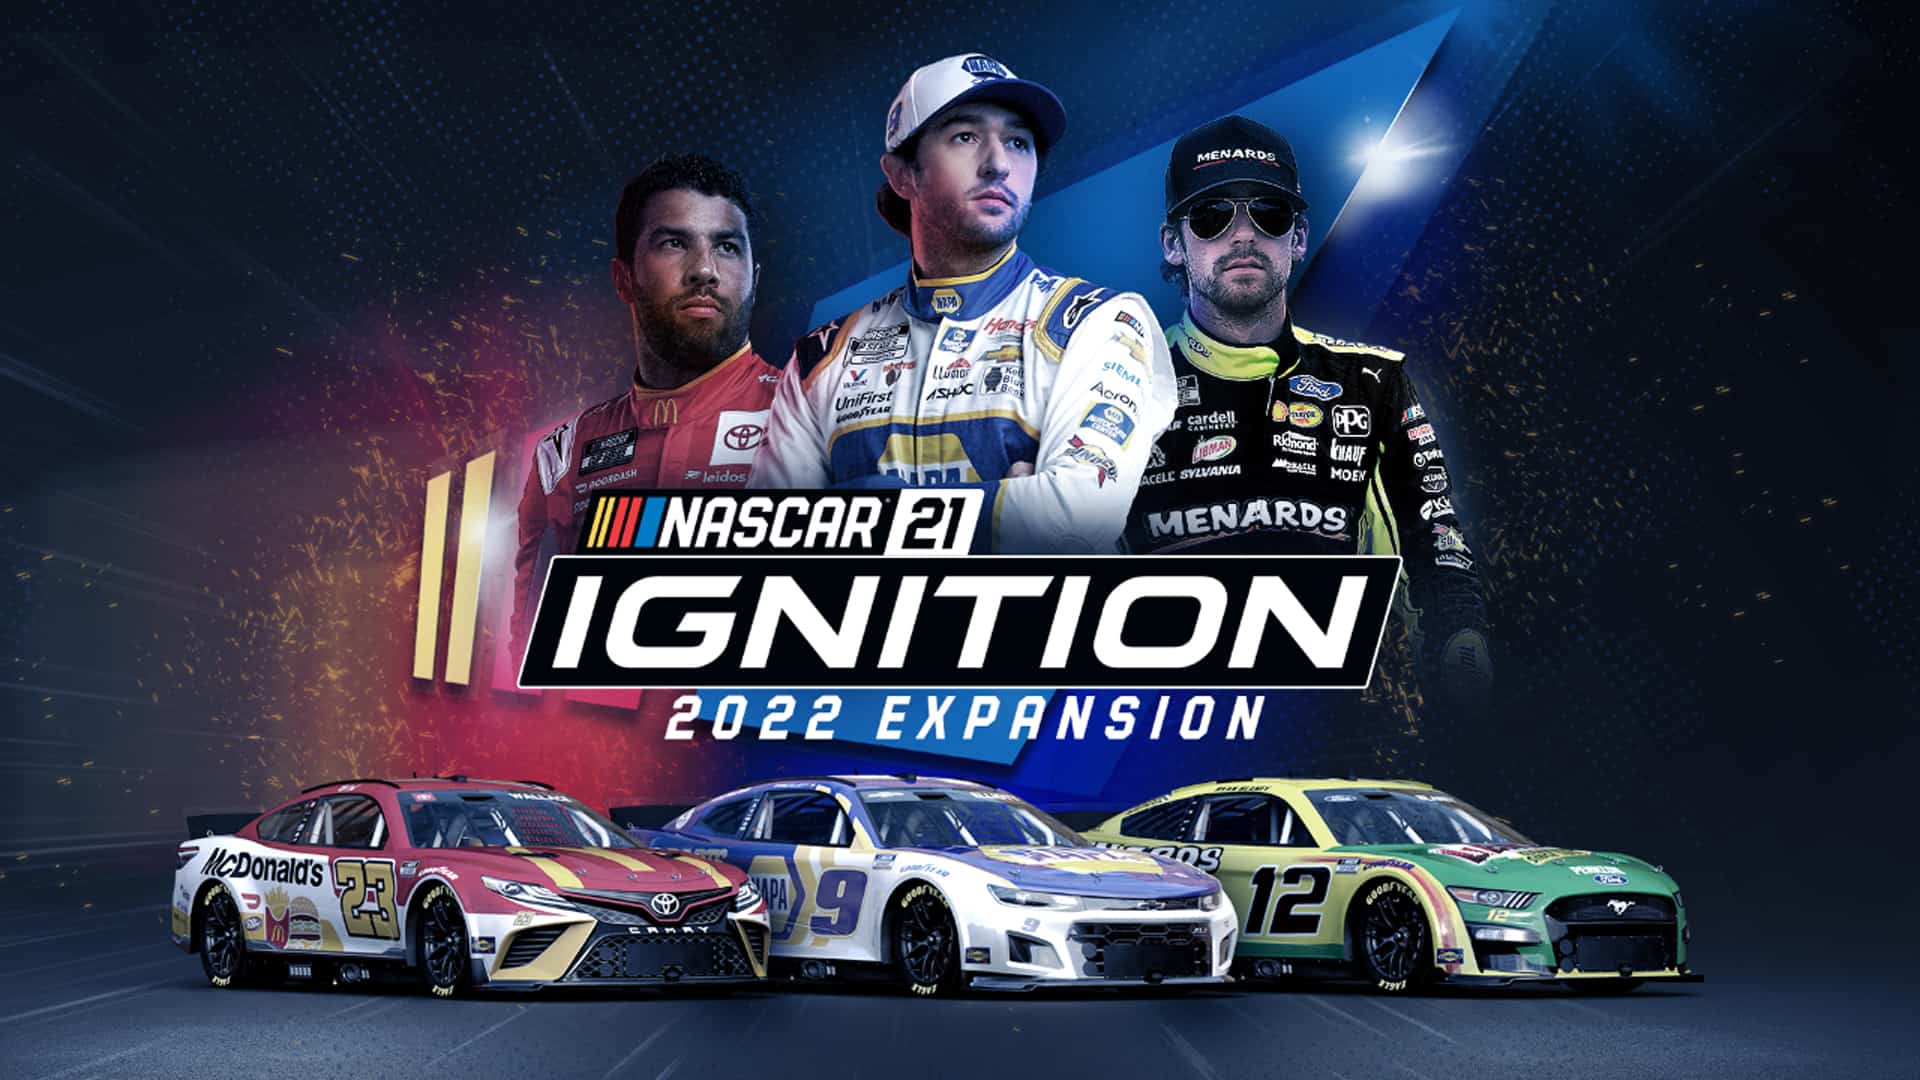 NASCAR 21 Ignitions free 2022 Expansion coming 6th October Traxion